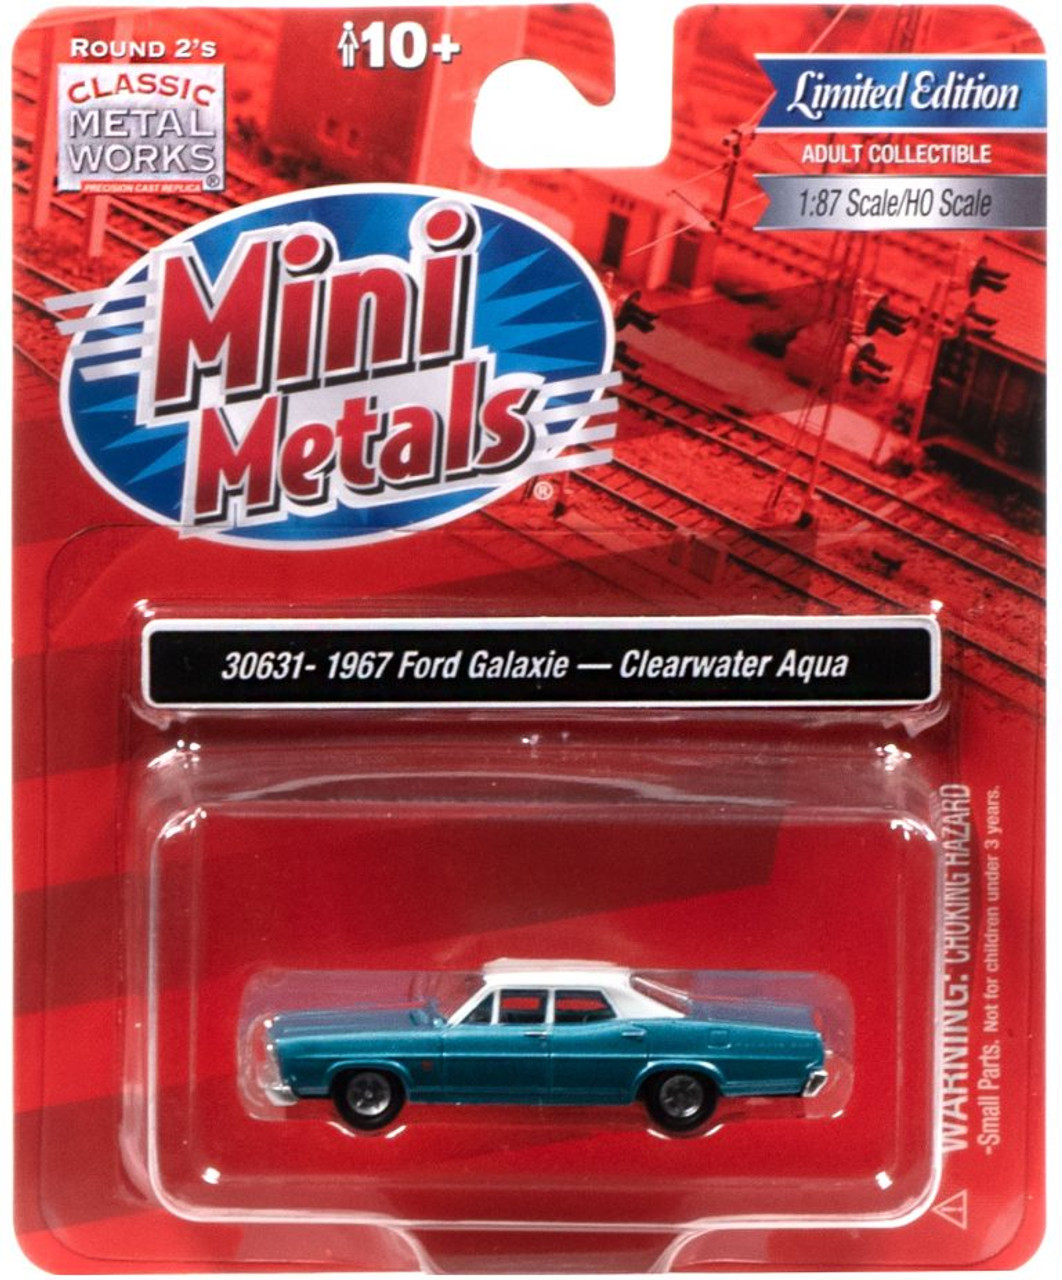 Classic Metal Works 30631 HO 1/87 1967 Ford Galaxie Clearwater Aqua & White Package